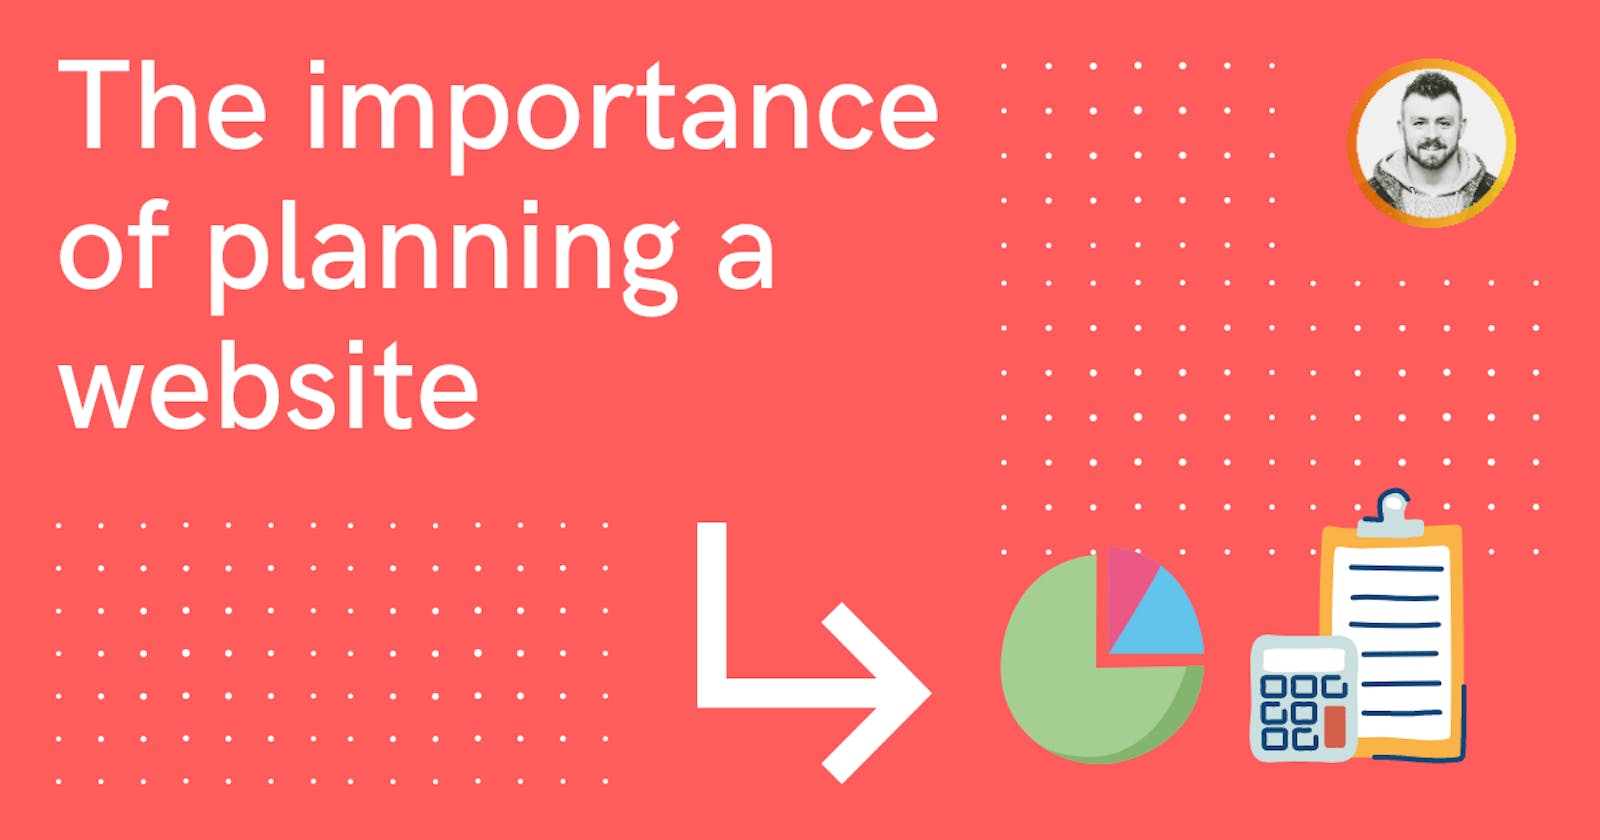 The importance of planning a website